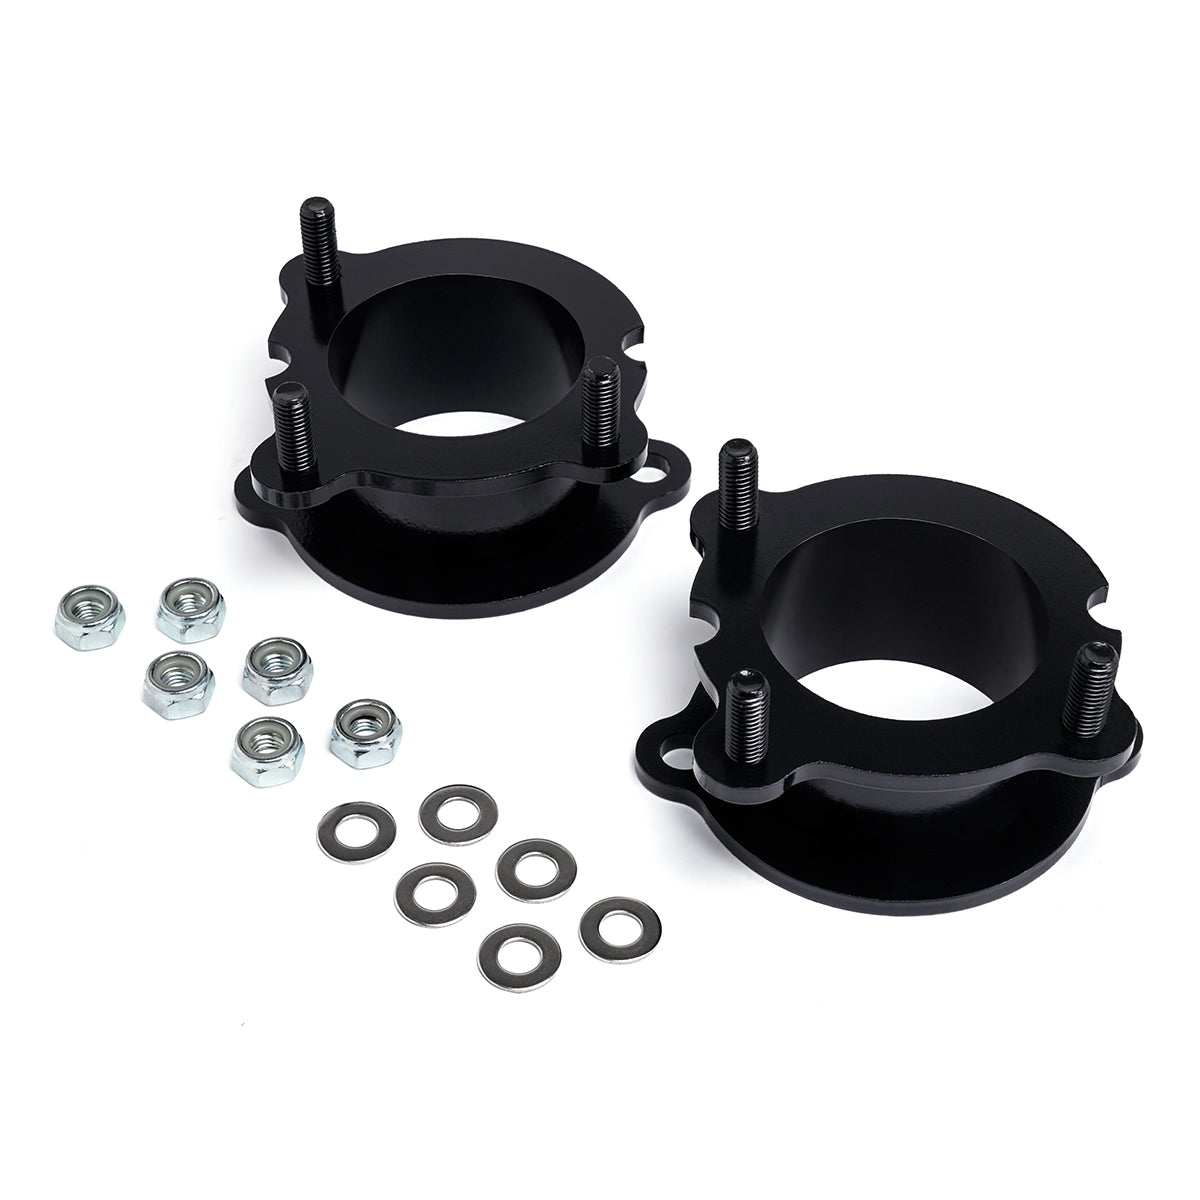 2002-2009 Chevy Trailblazer 2WD 4WD Front Lift Kit with Bump Stops